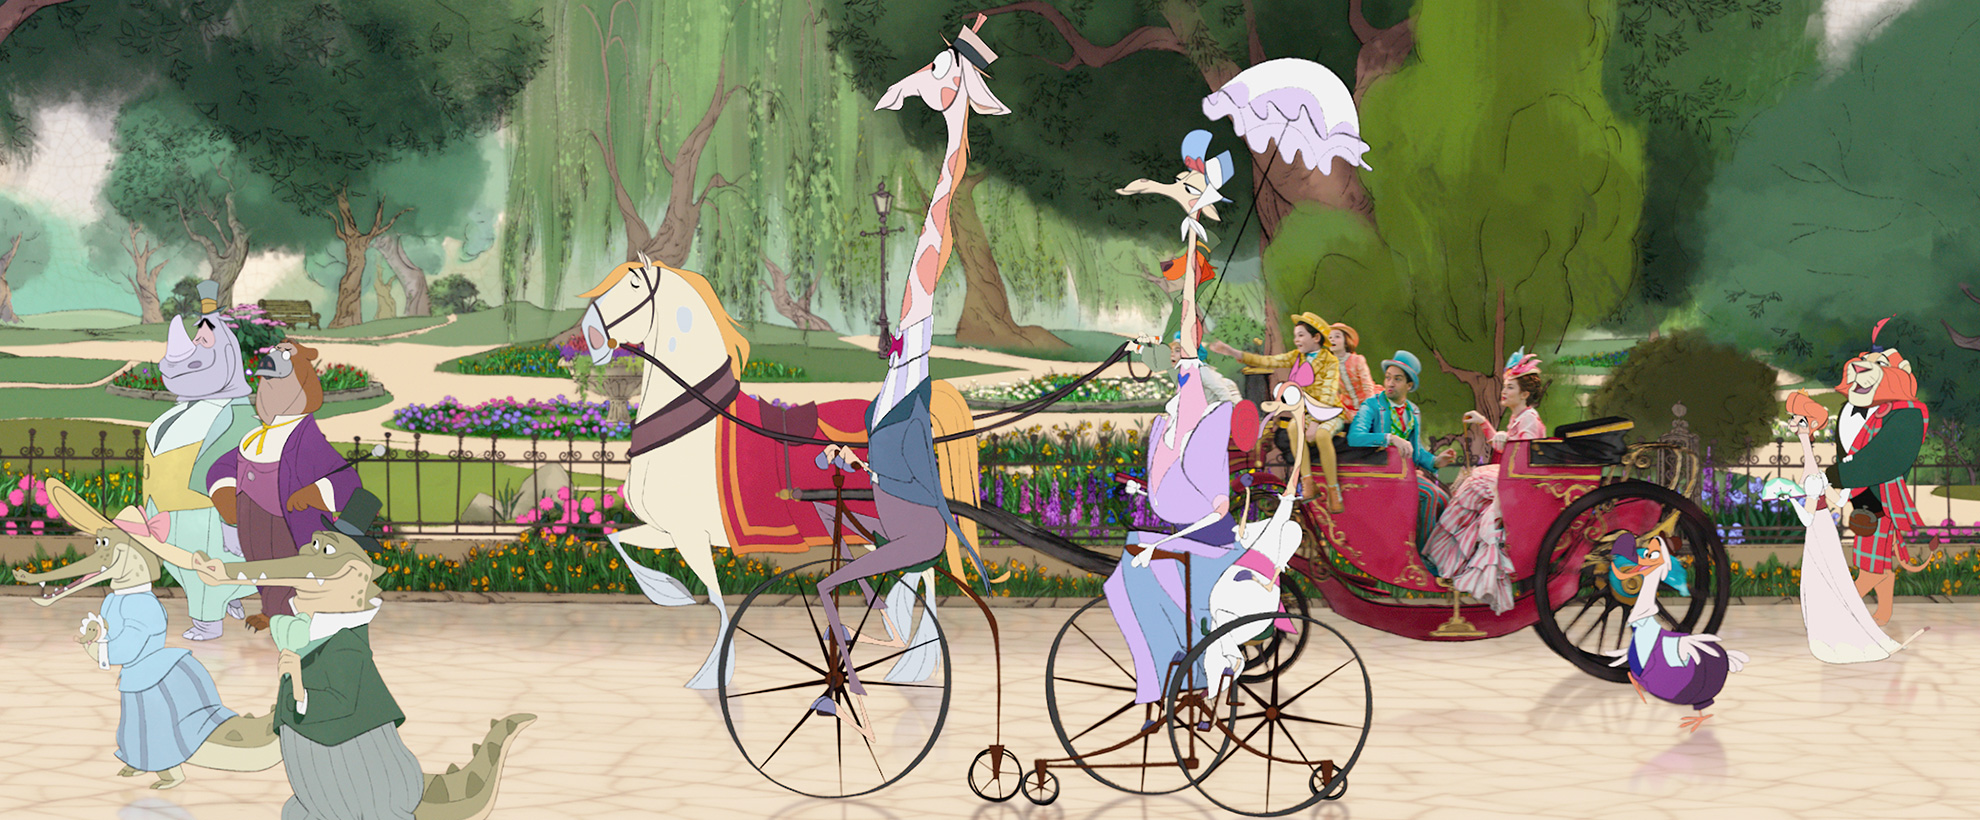 Mary Poppins, Bert, and the Banks Children in a carriage pulled by cartoon animals